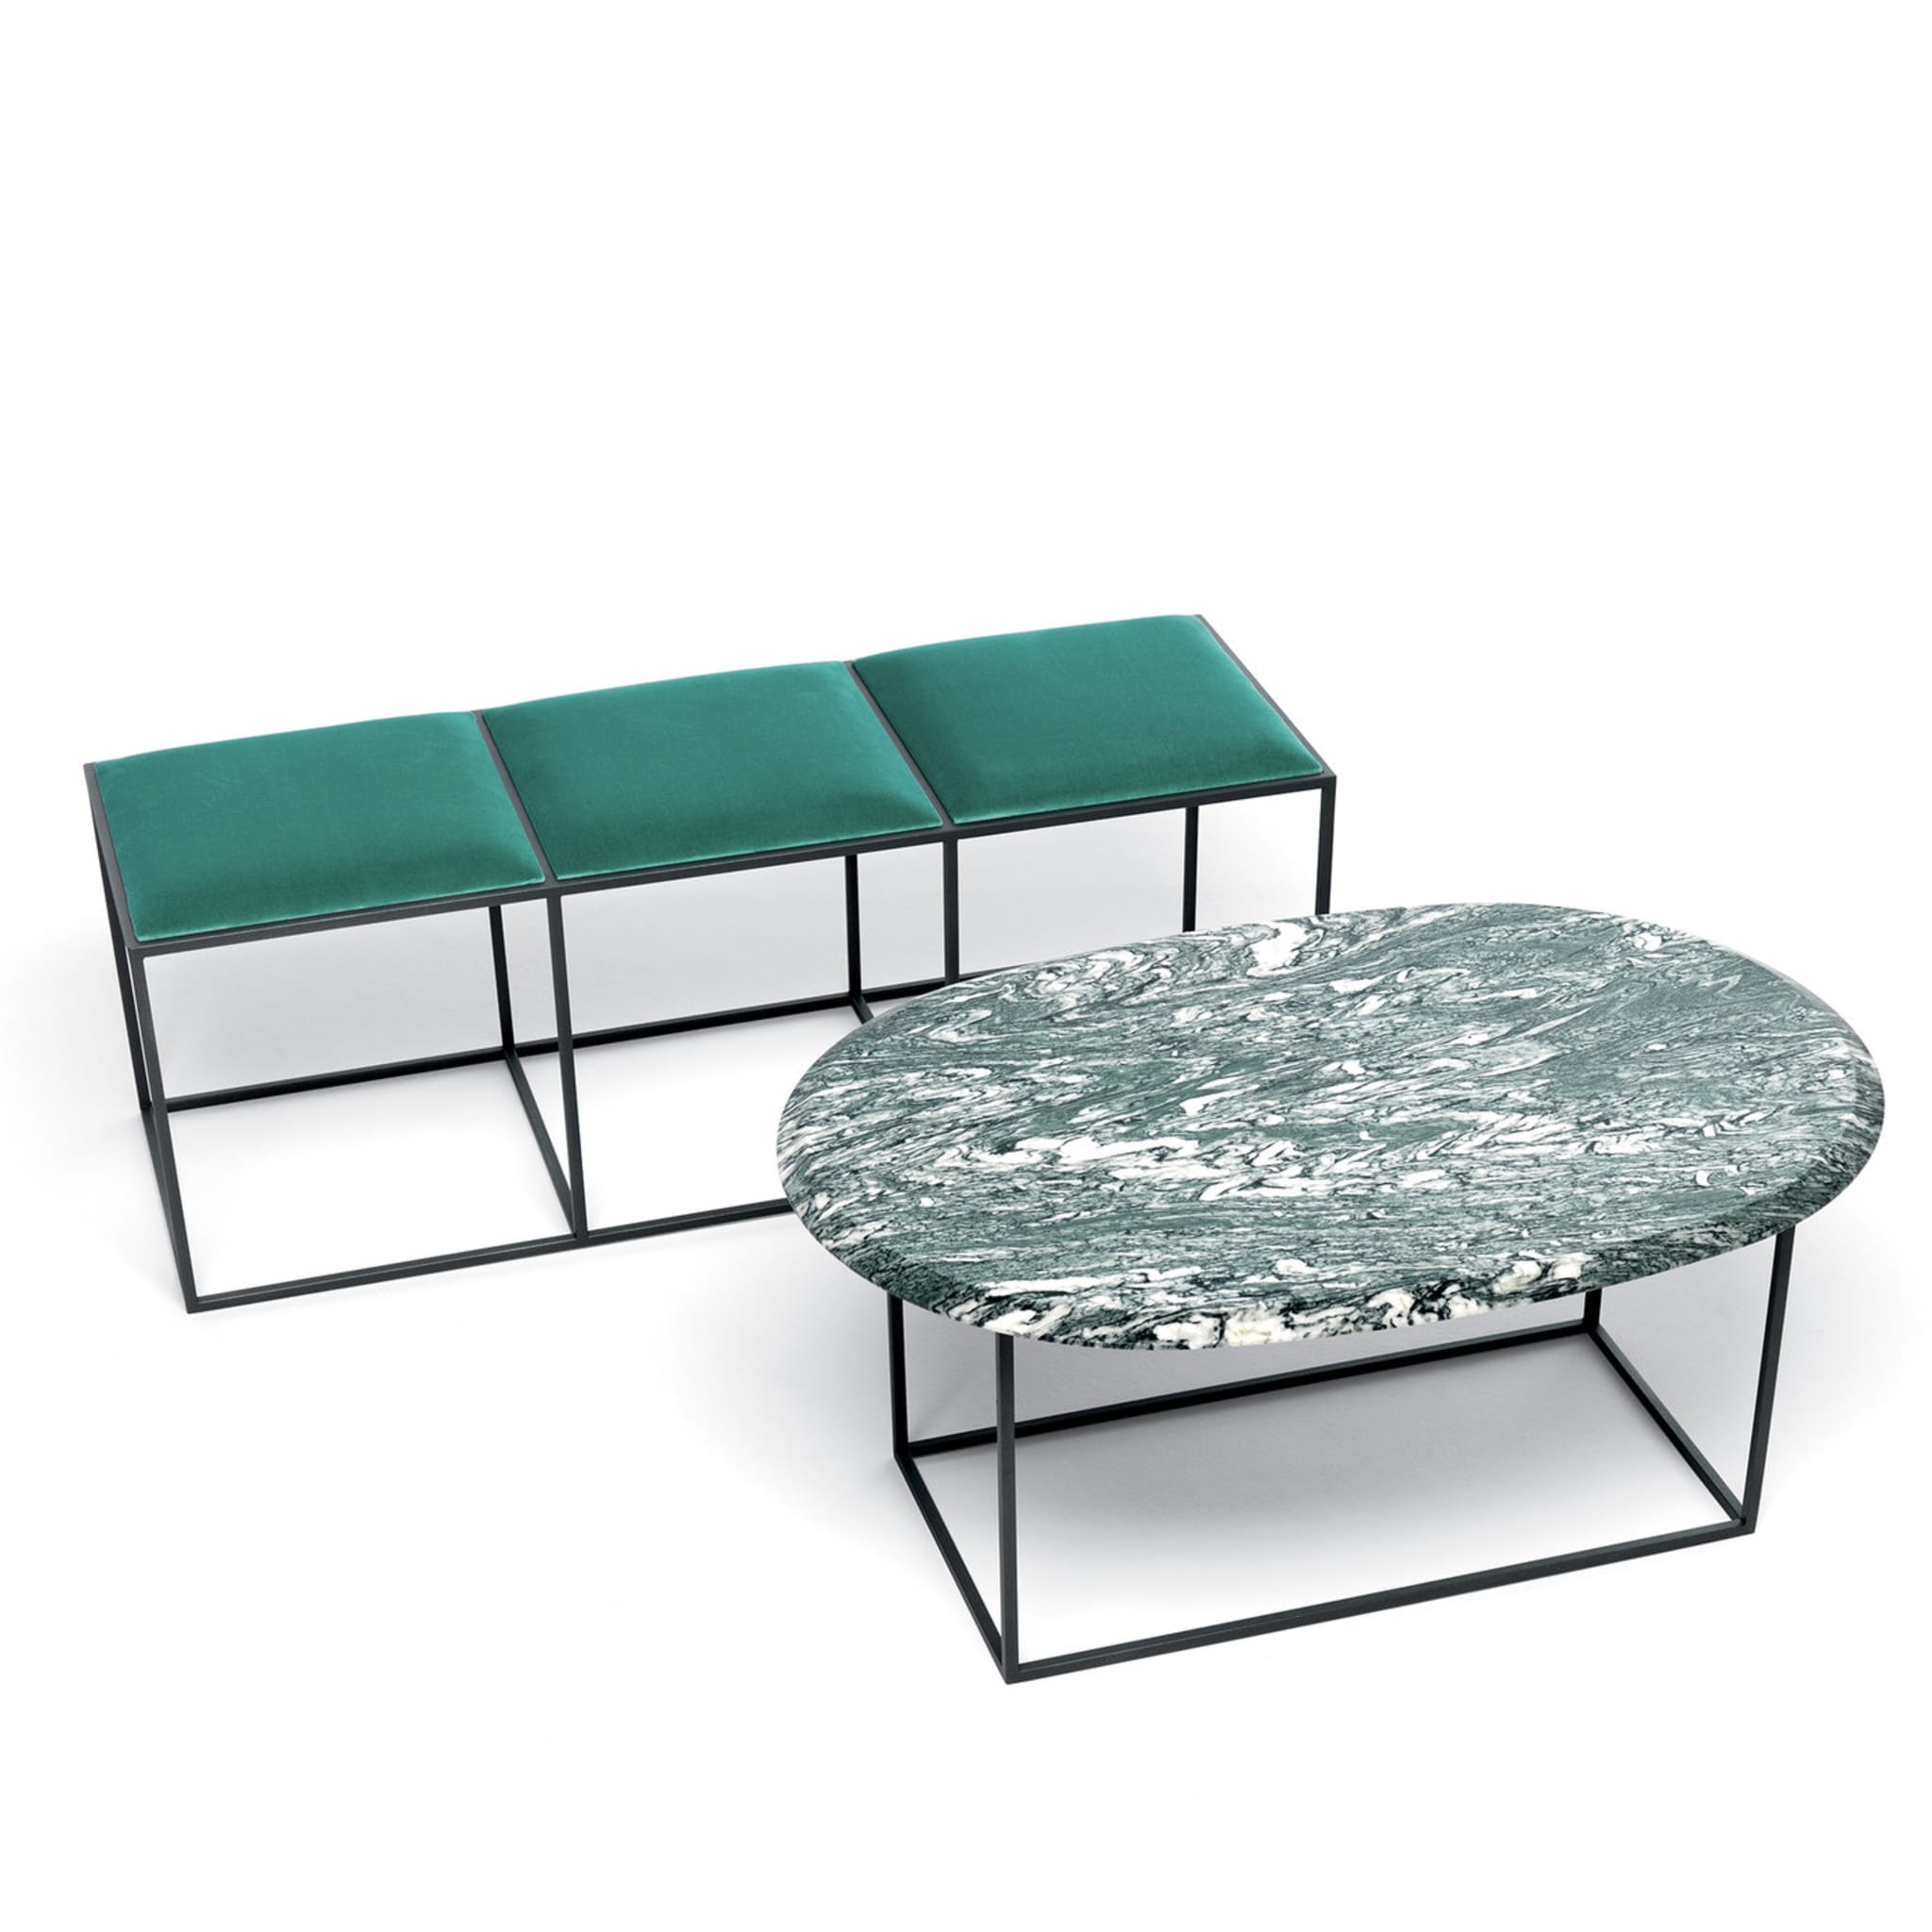 MT Low Coffee Table with Cipollino Marble Top - Alternative view 1